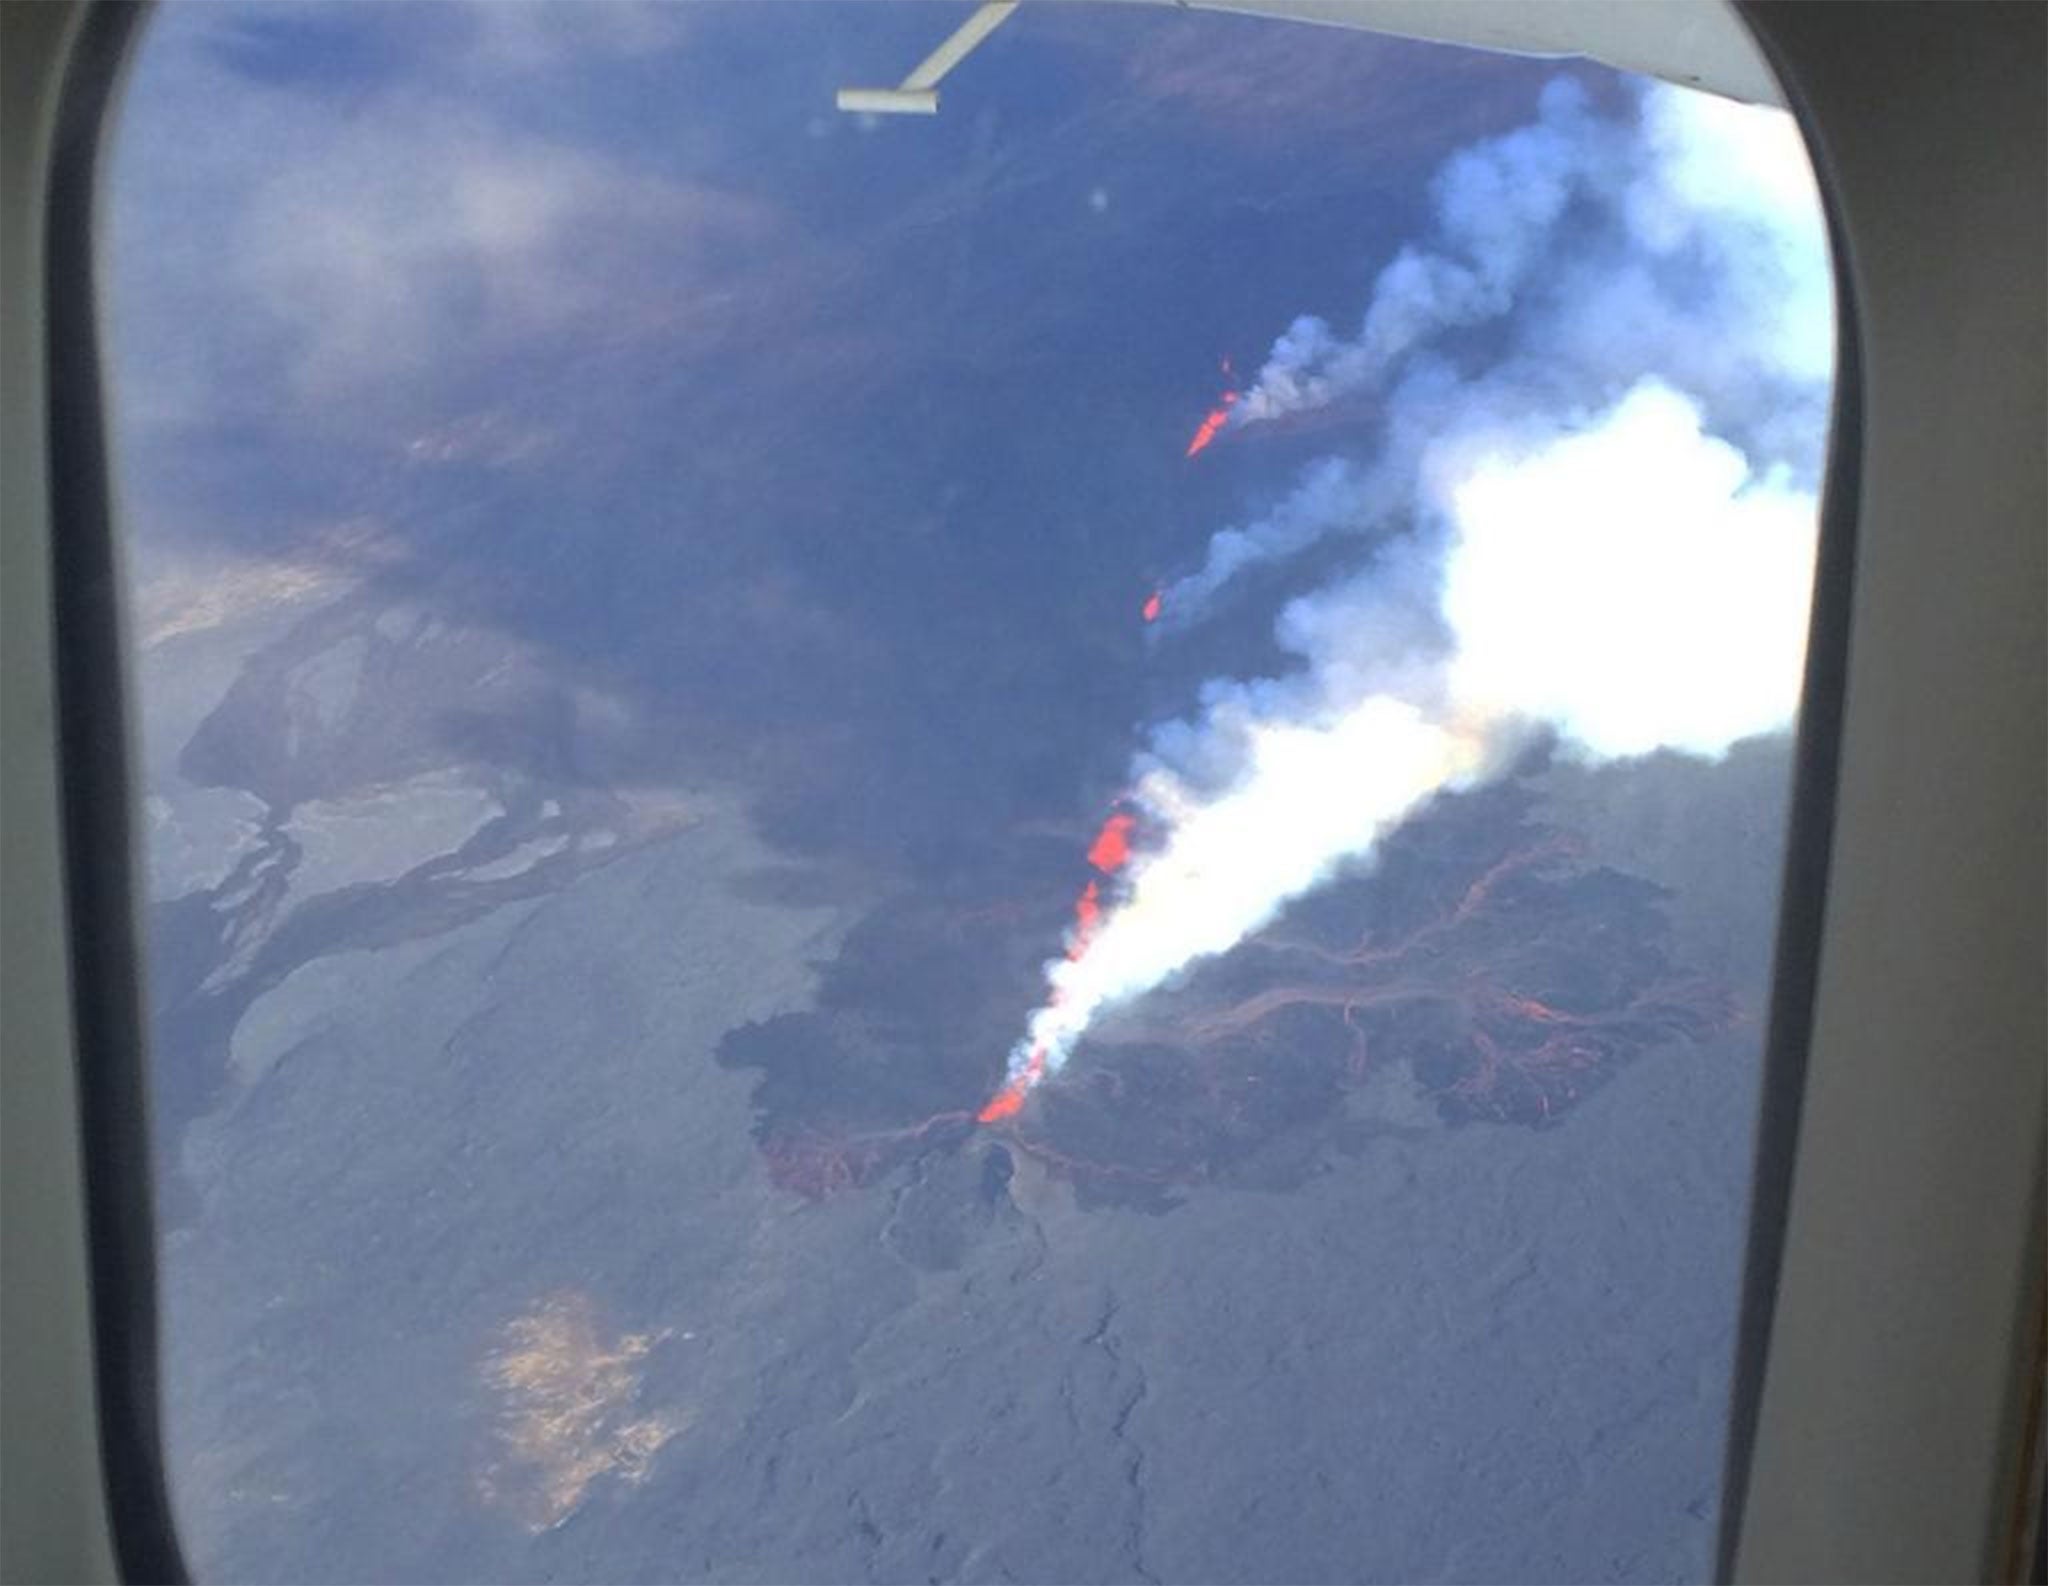 This image was tweeted by Icelandair, showing the view of the volcano from one of its planes